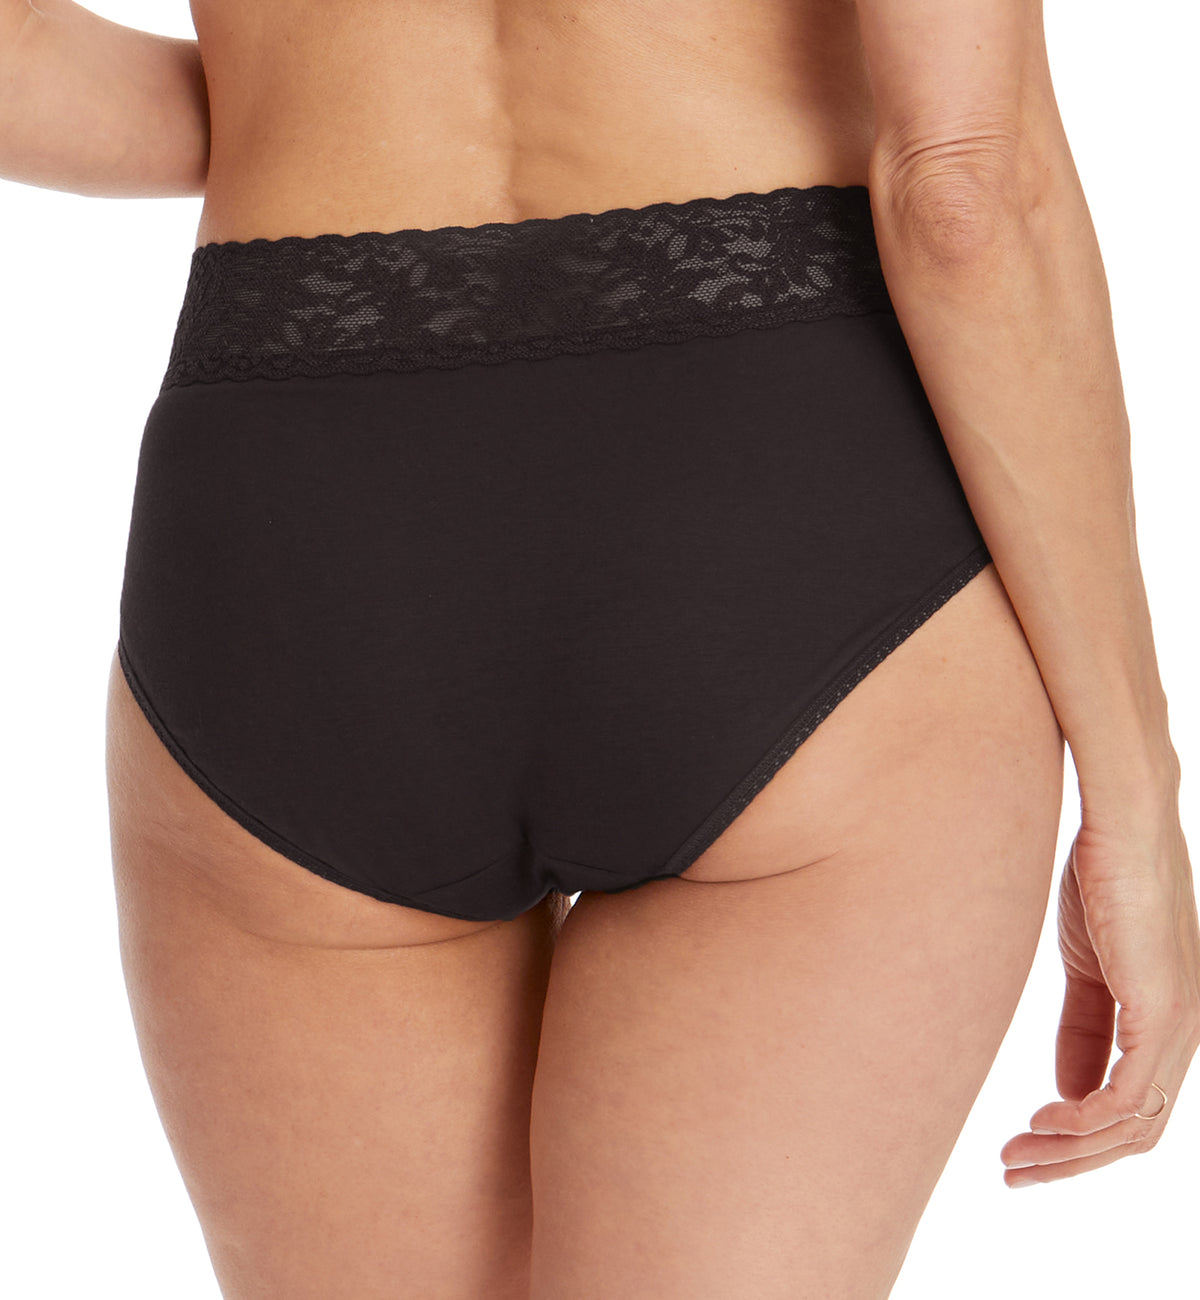 Hanky Panky Cotton French Brief with Lace (892461),Small,Black - Black,Small